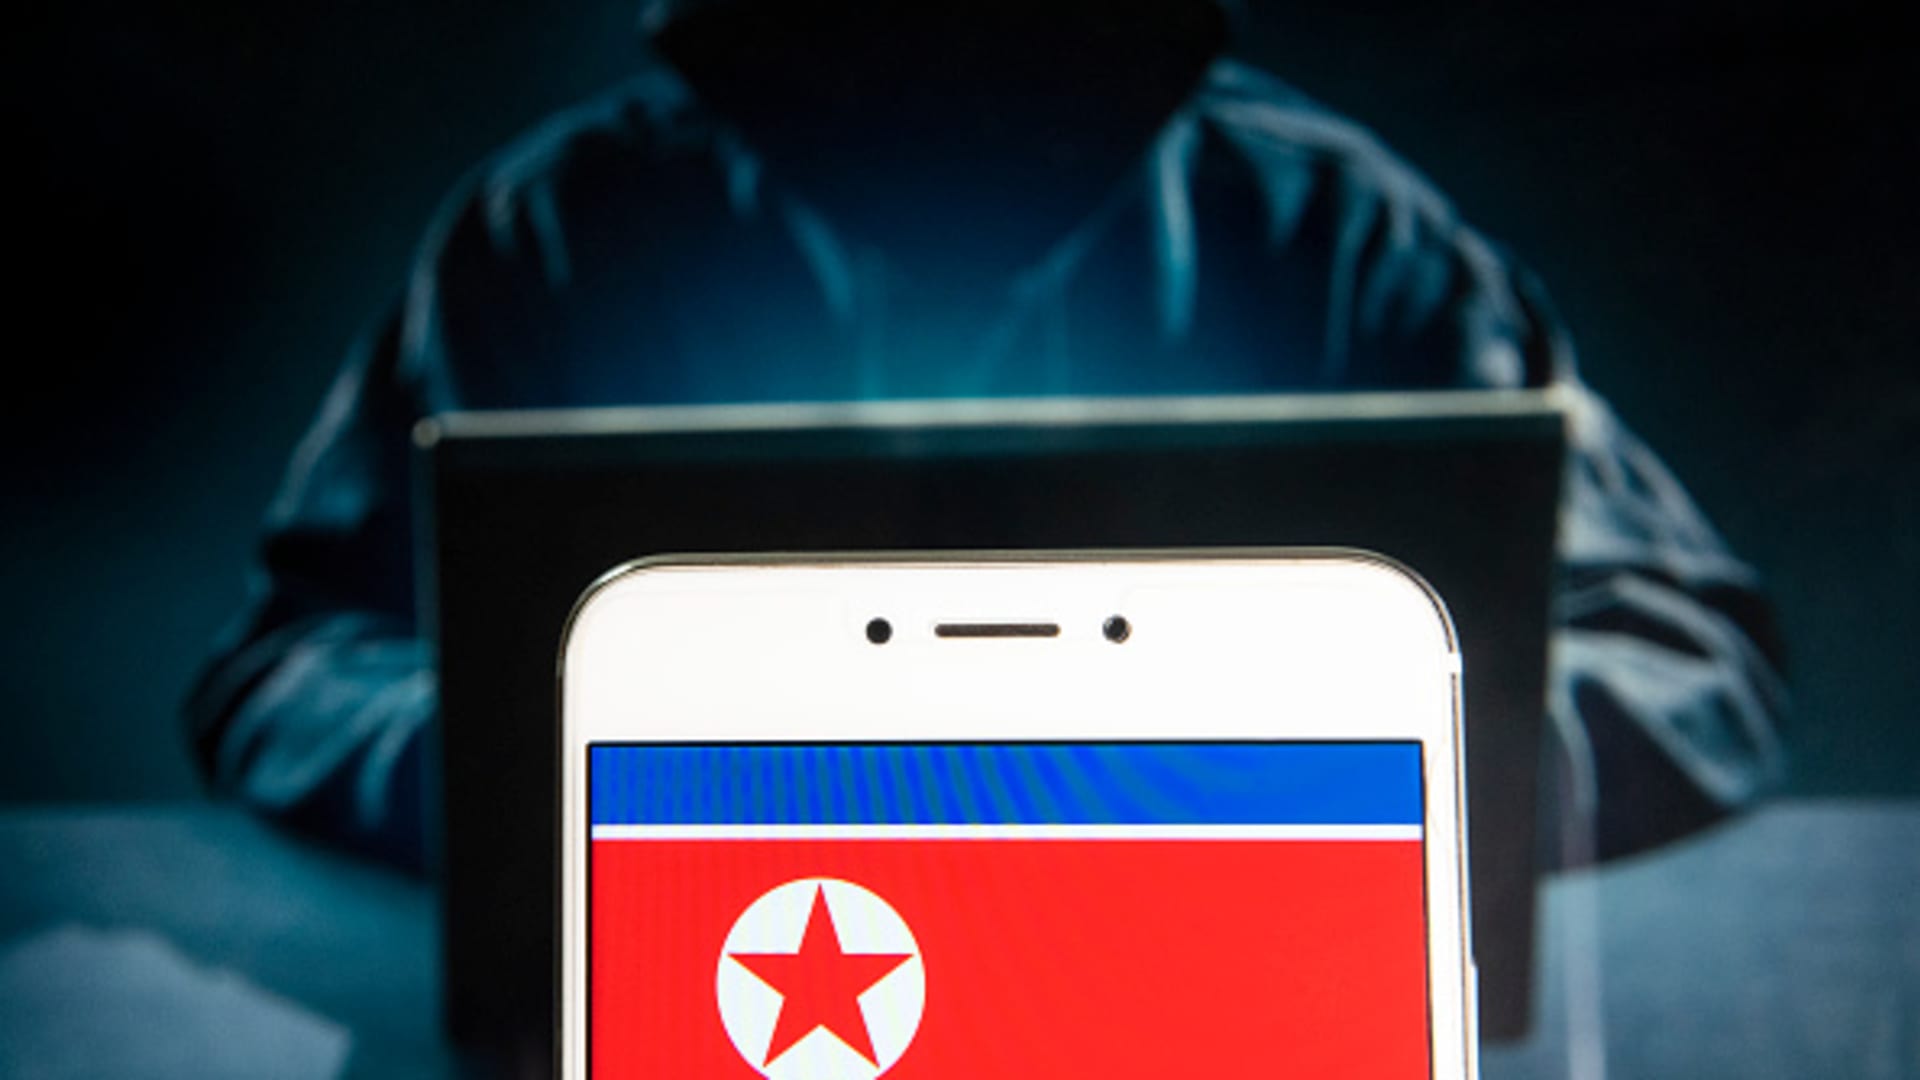 North Korean hackers have allegedly stolen hundreds of millions in crypto to fund nuclear programs